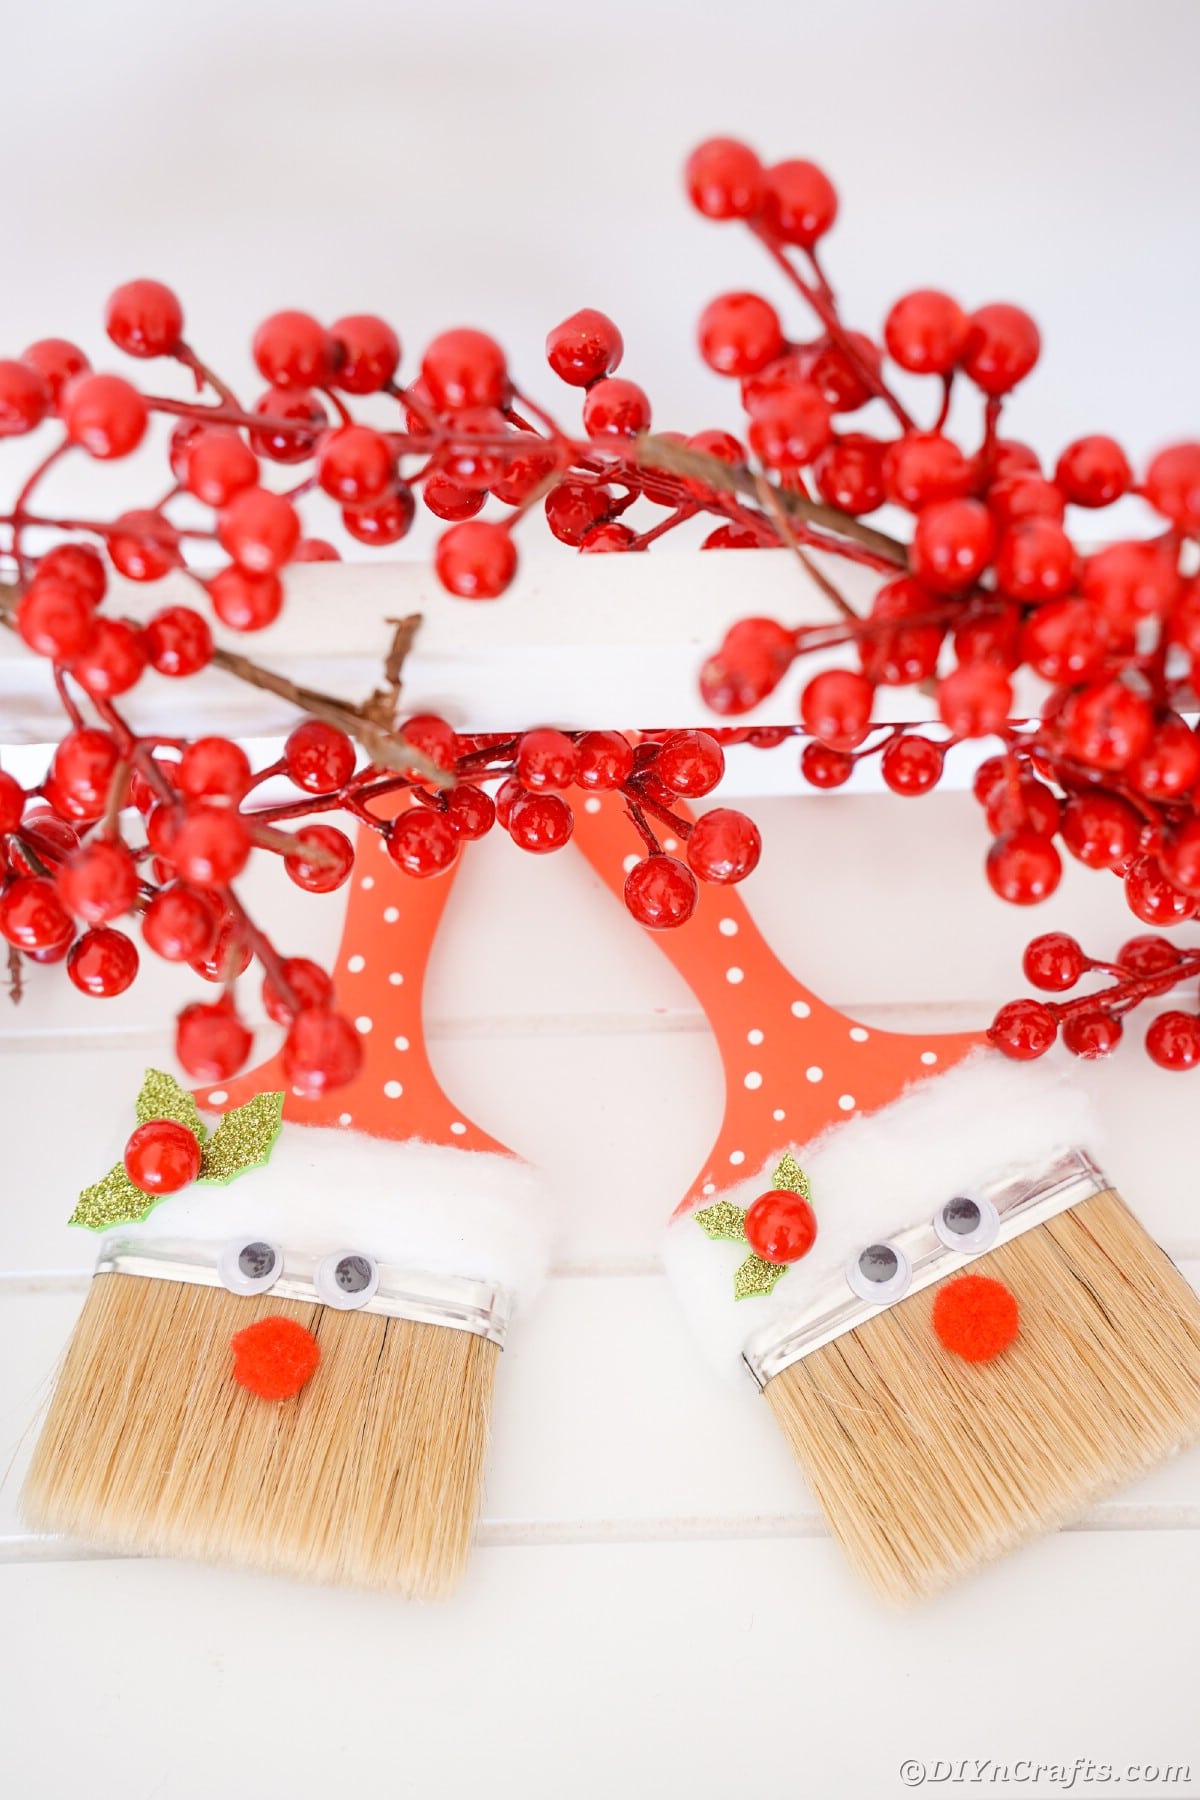 santa paintbrushes on table with holly berries